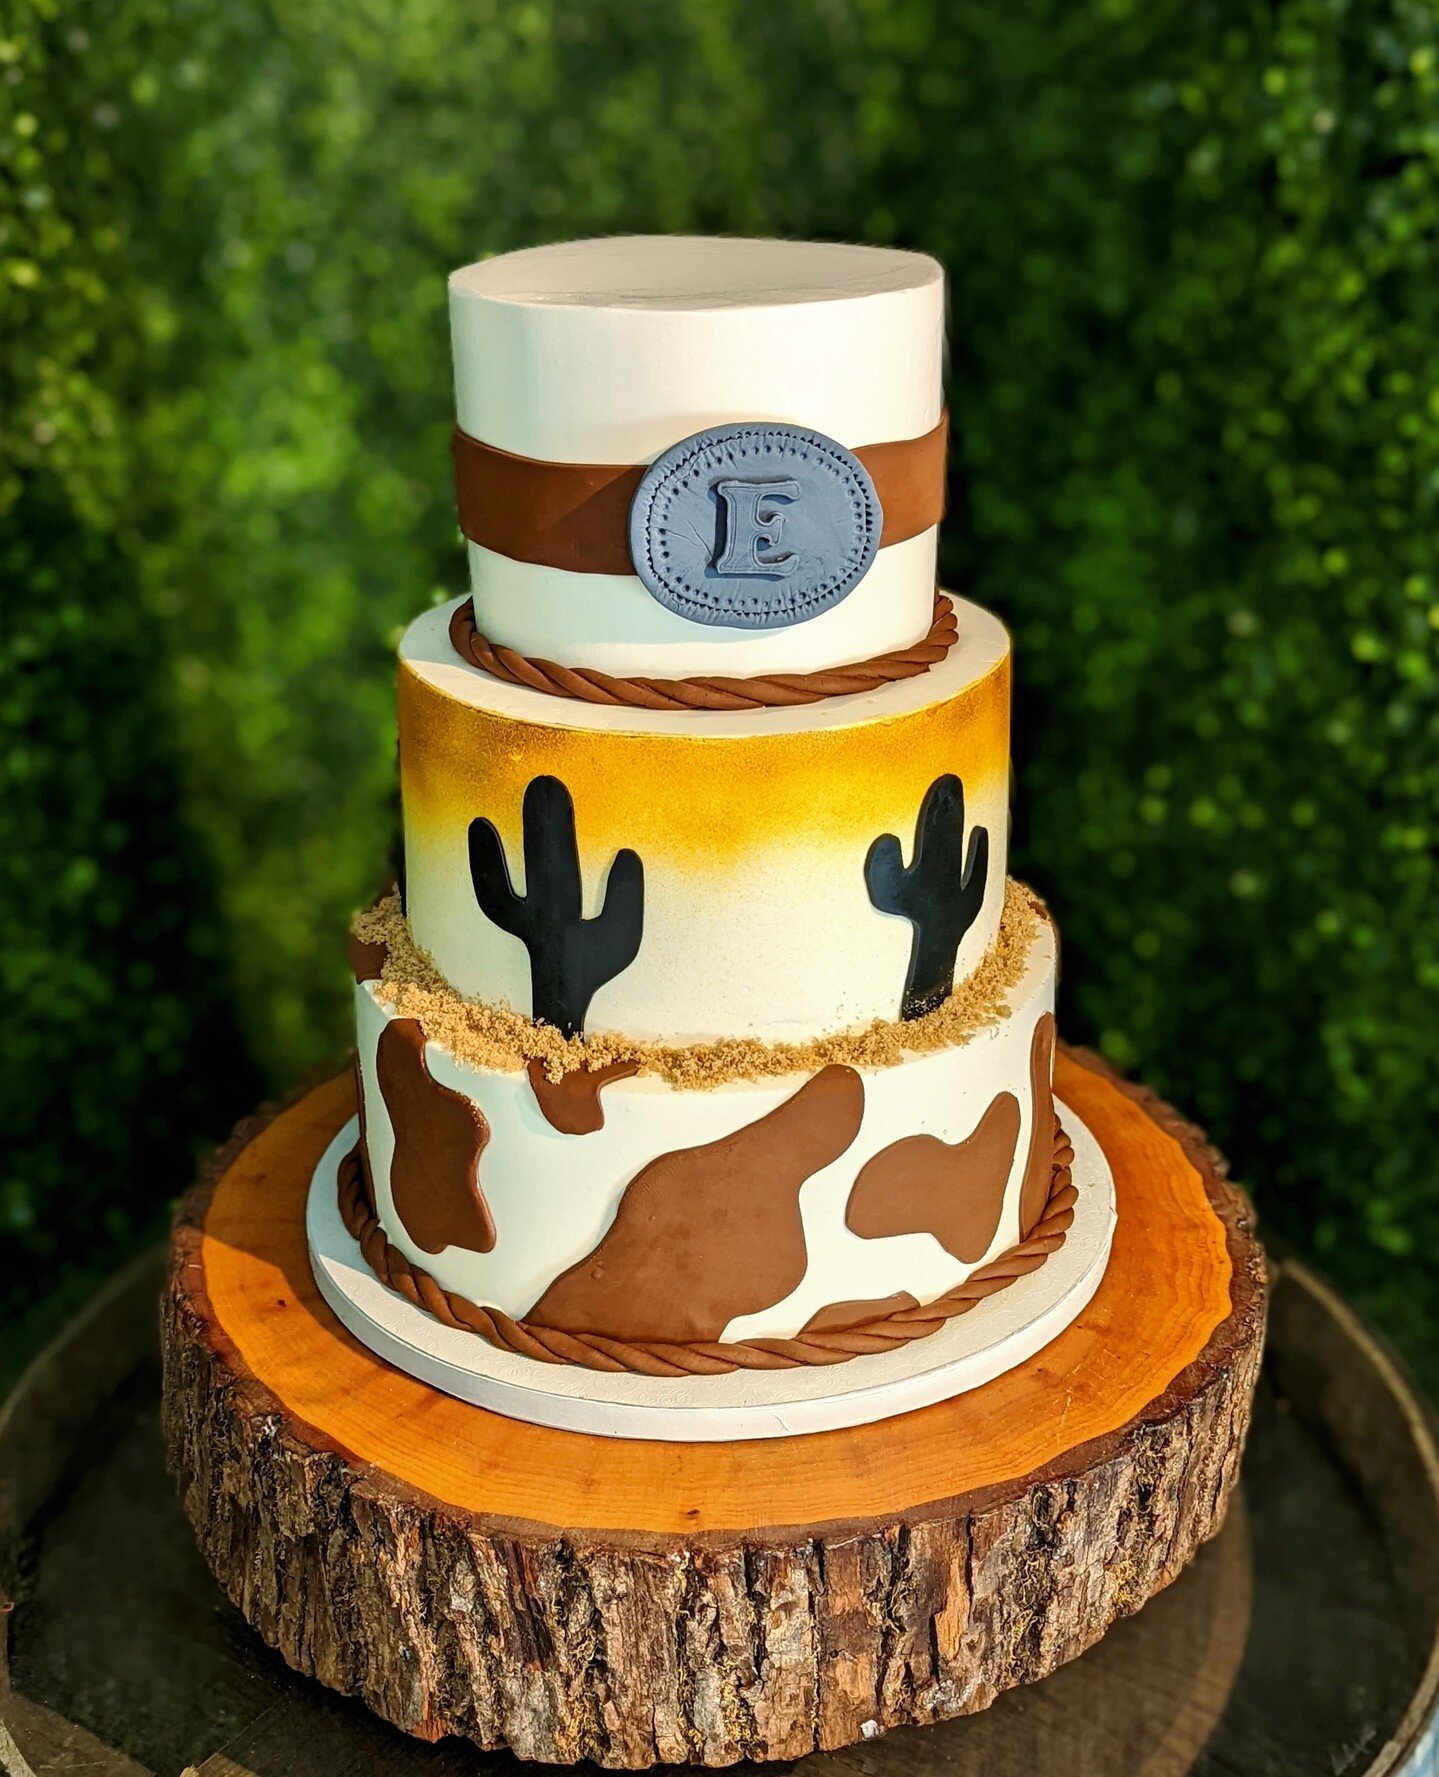 Cowboy Cake 🤠⁠
⁠
Need a cake or desserts for an event?⁠
Call us at (951) 699-2399 for a quote or check our website out at www.1914bakery.com !⁠
⁠
#cakes #cake #cakedecorating #birthdaycake #food #cakesofinstagram #chocolate #instacake #baking #birth